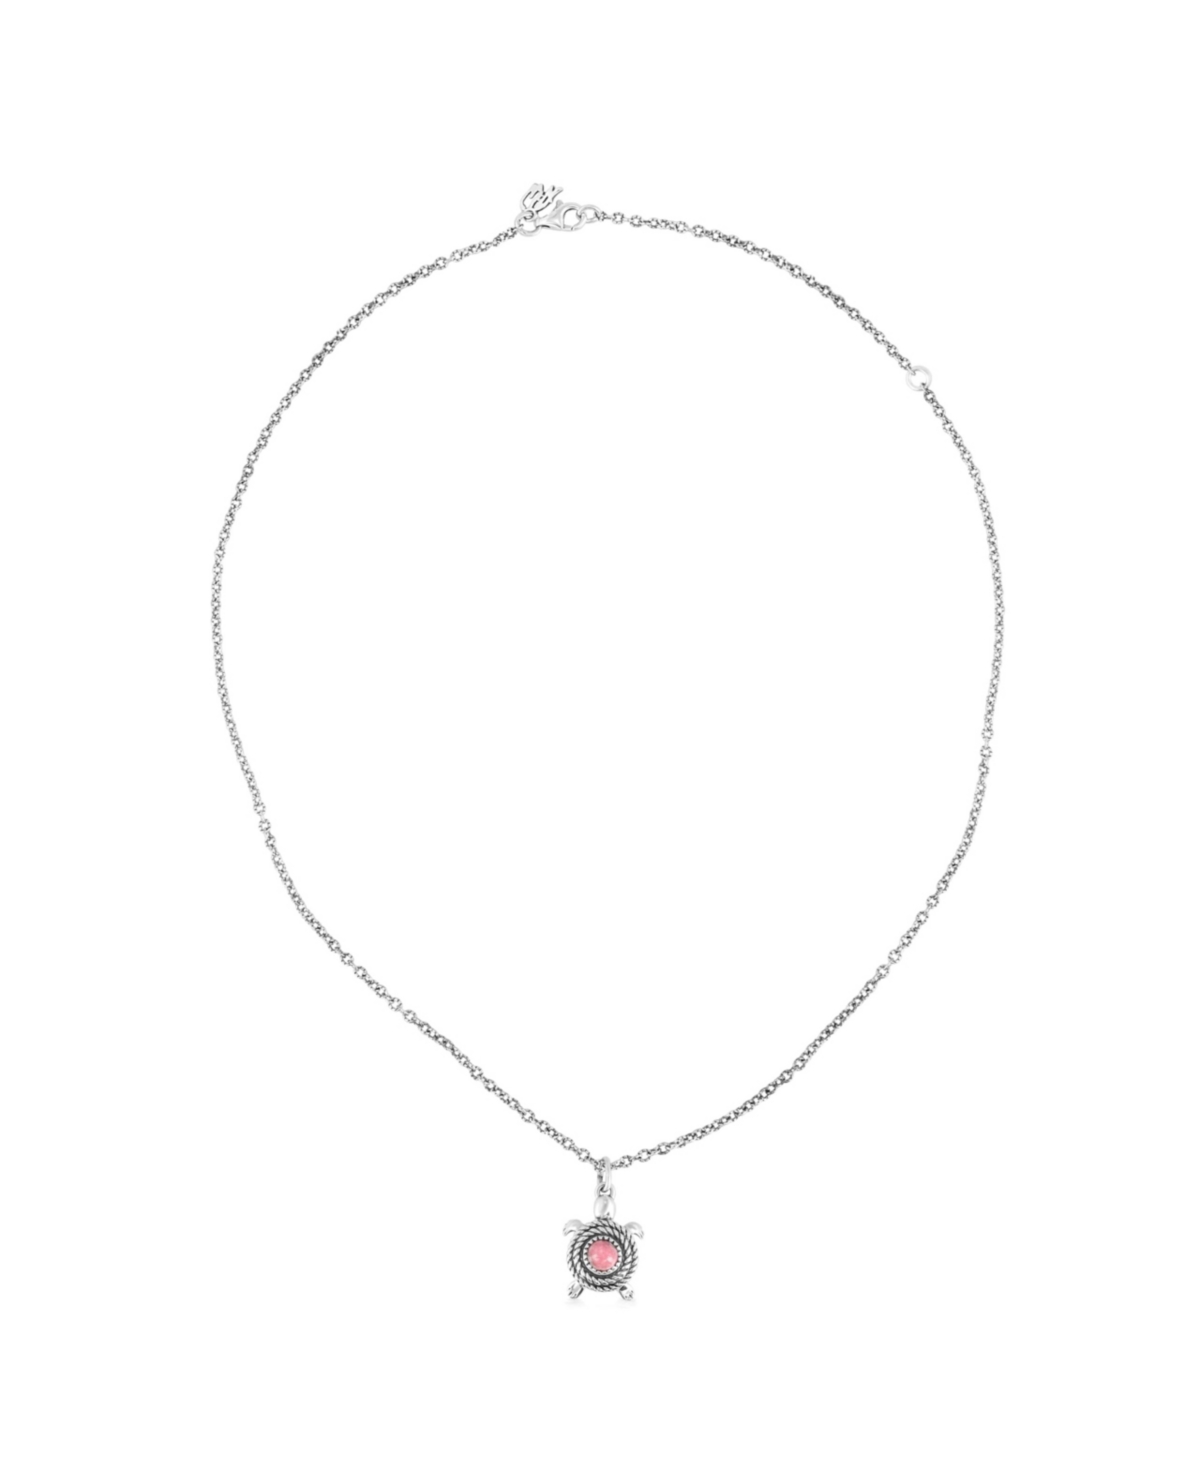 Sterling Silver with Genuine Gemstone Turtle Design Women's Pendant Necklace, 16-19 Inches - Rhodonite